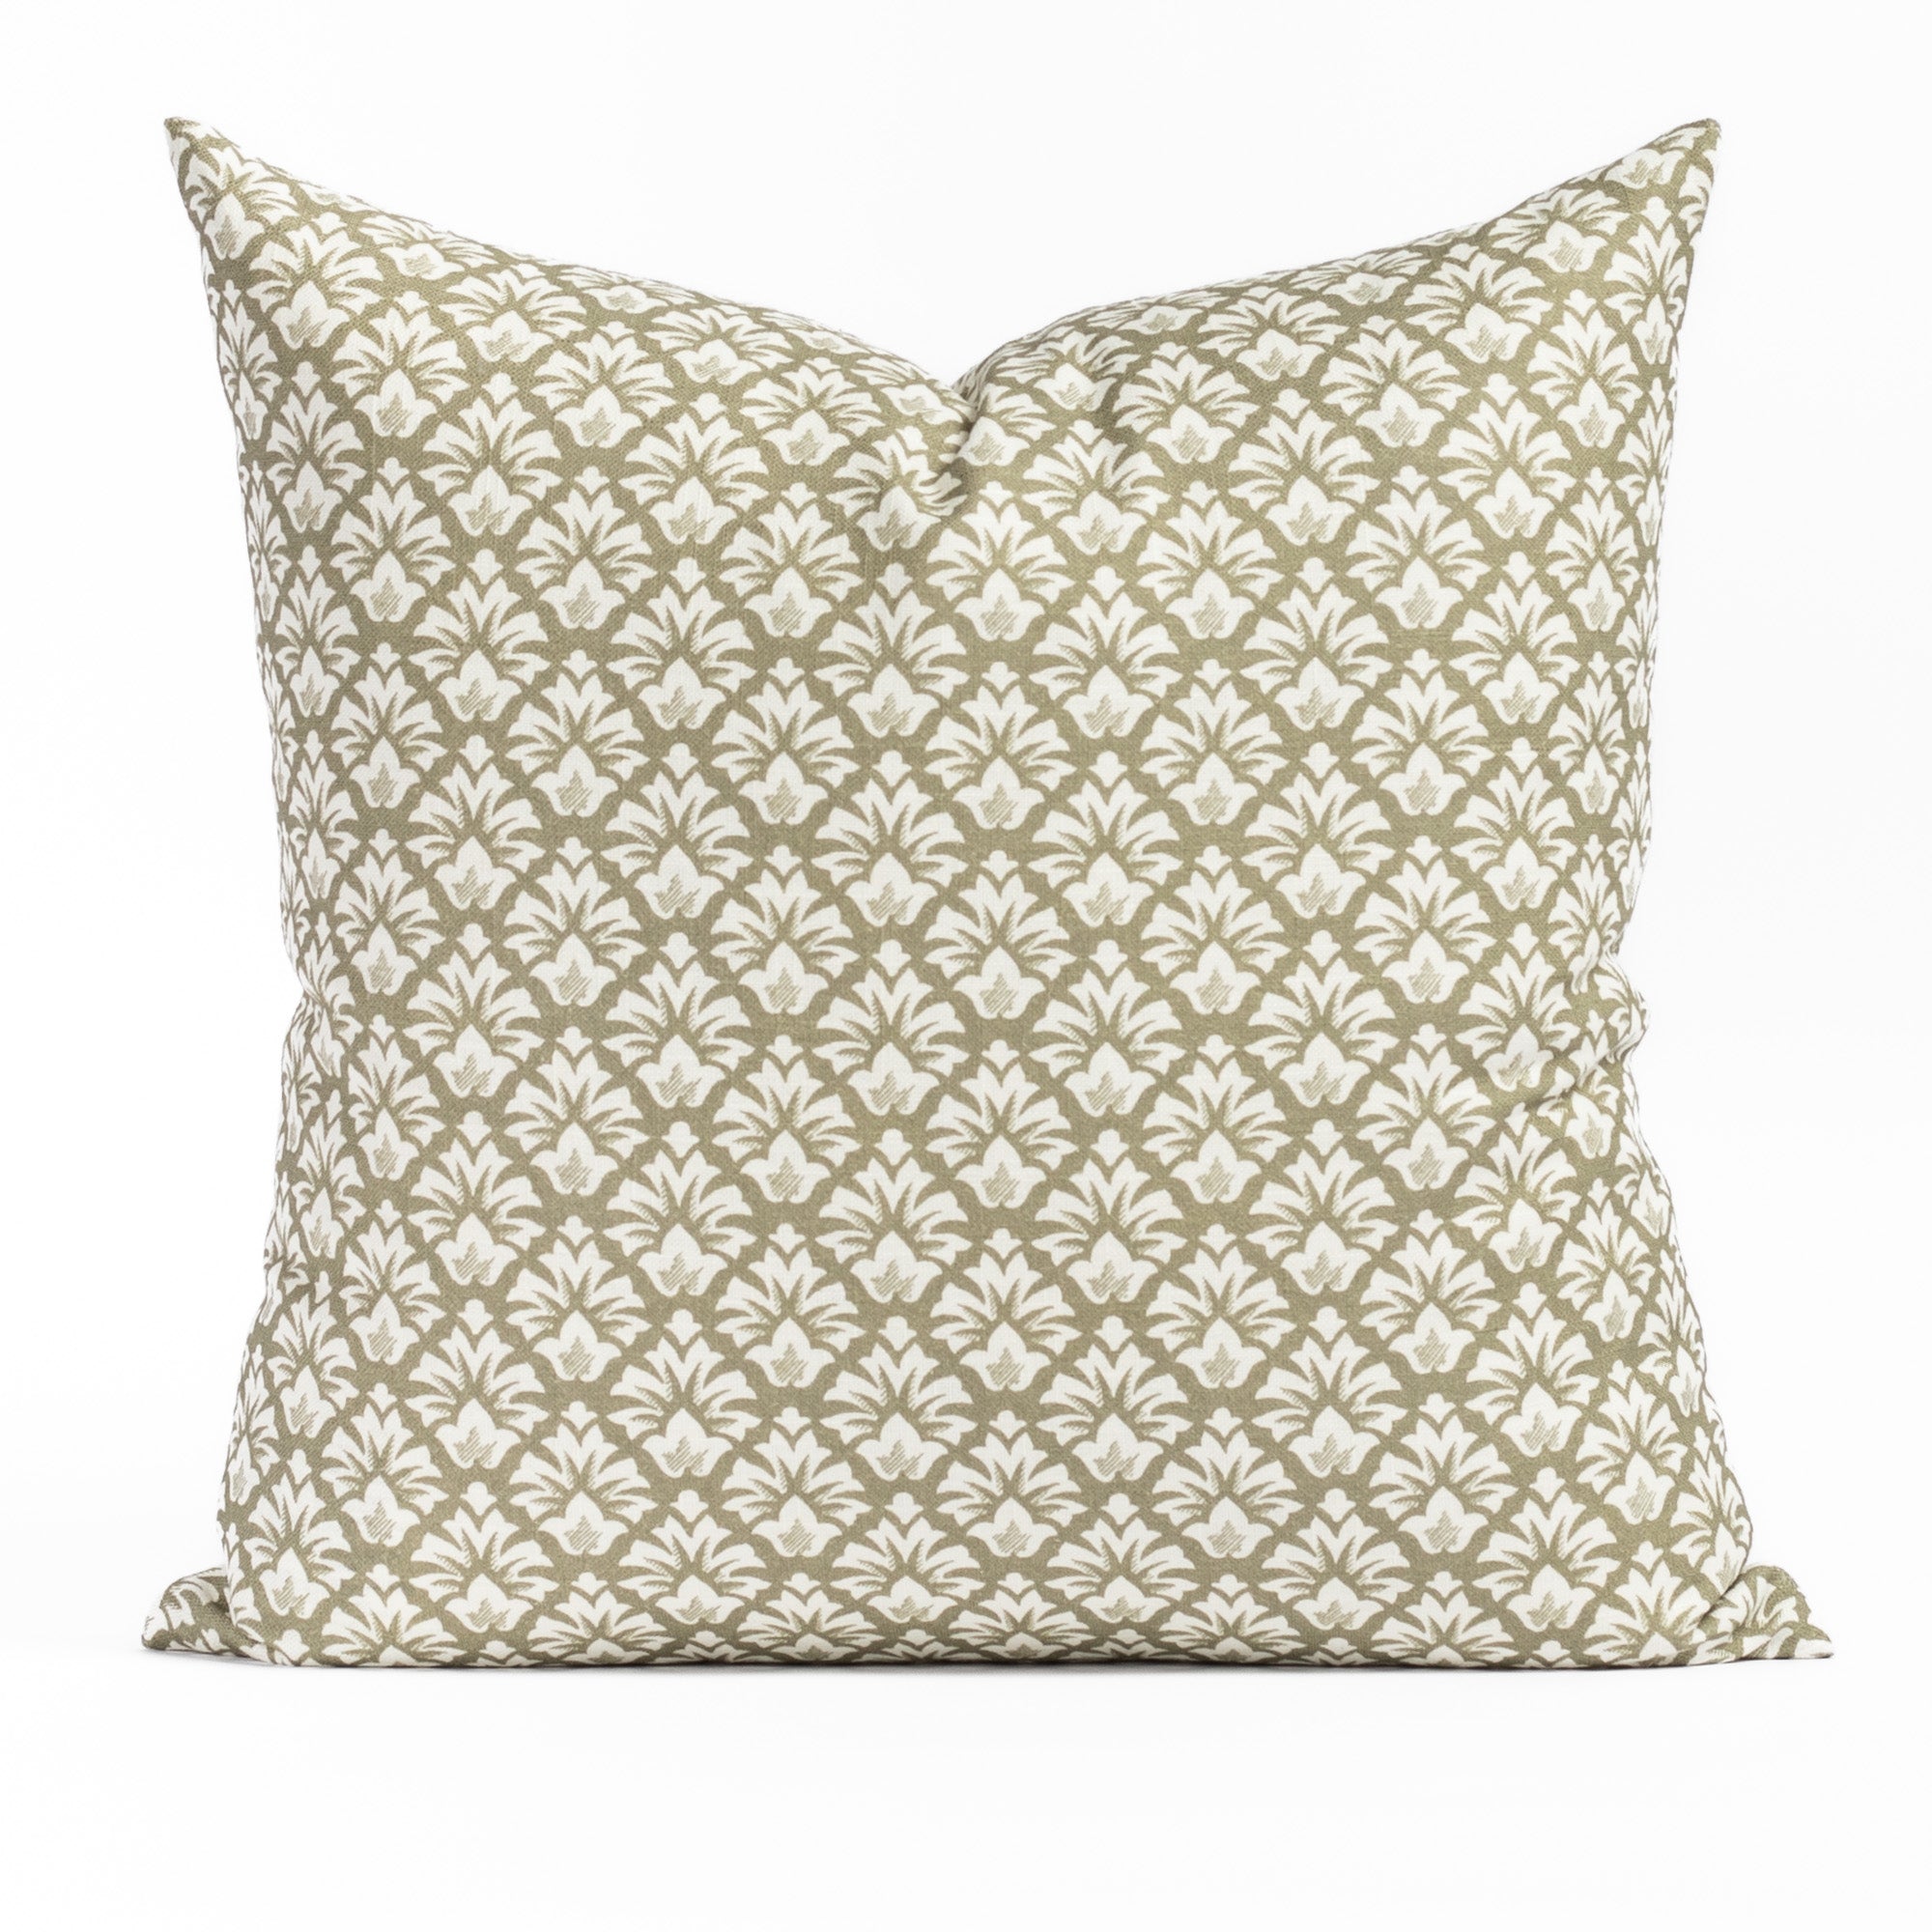 Calli 20x20 Pillow Moss, an olive green and cream floral block print throw pillow from Tonic Living